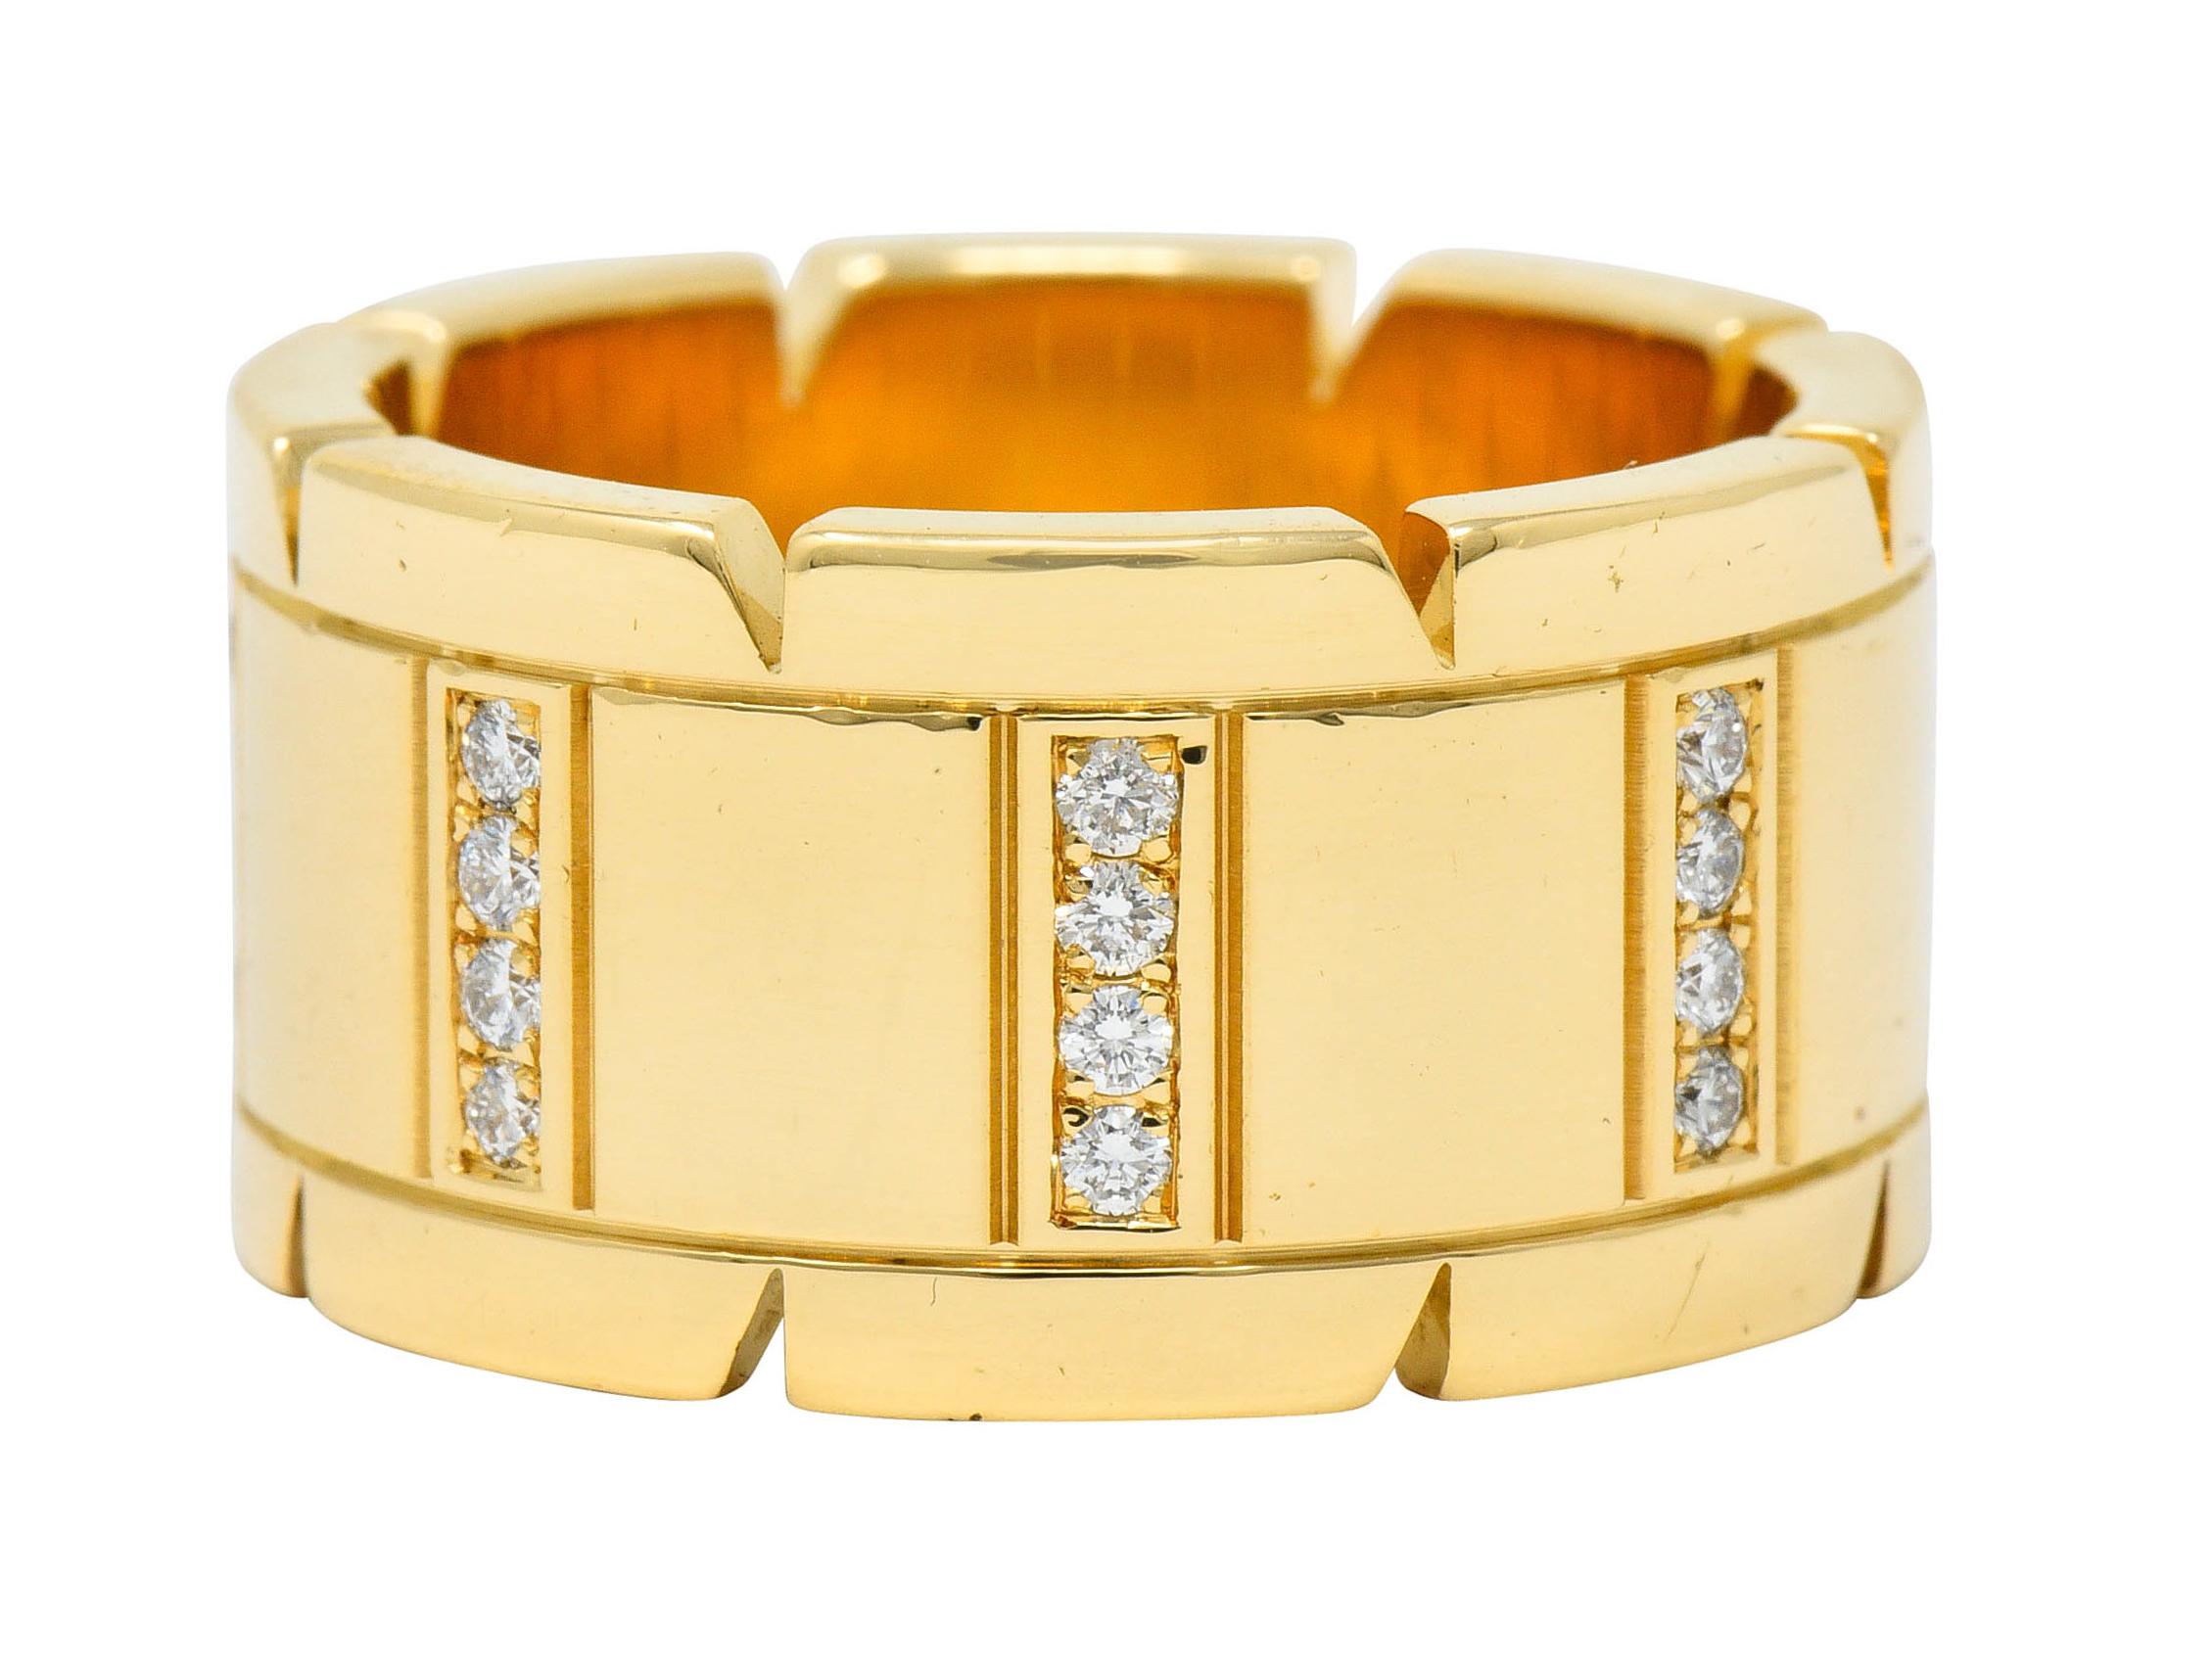 Wide band ring features a deeply engraved center depicting wide and narrow rectangles

Flanked by polished white gold edges with a pierced triangular motif

Accented by round brilliant cut diamonds weighing in total approximately 0.50 carat; F/G